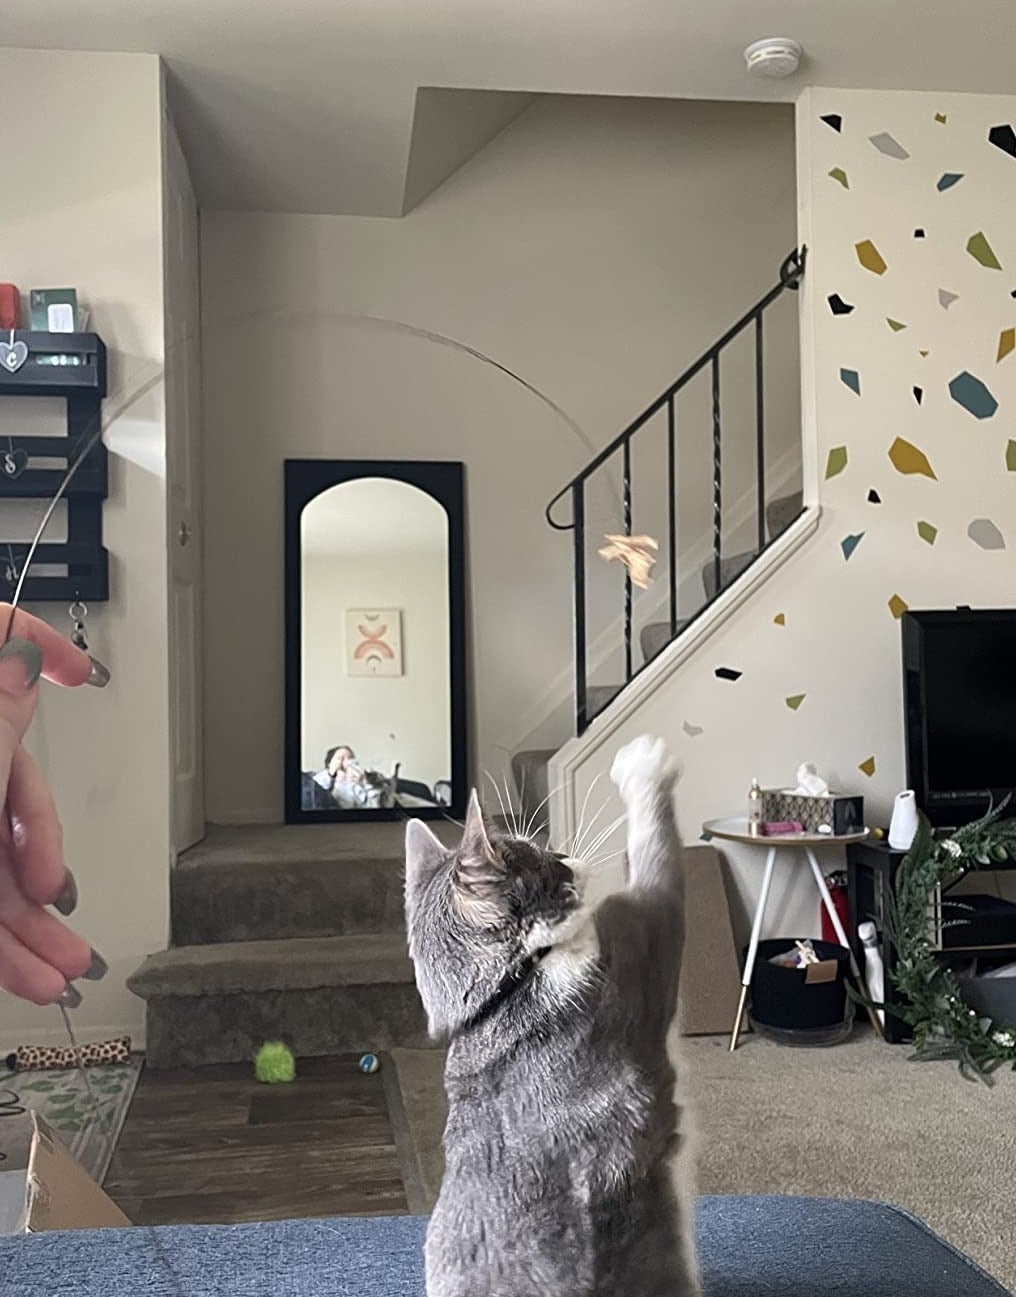 a reviewer photo of them playing with a cat using the cat dancer toy